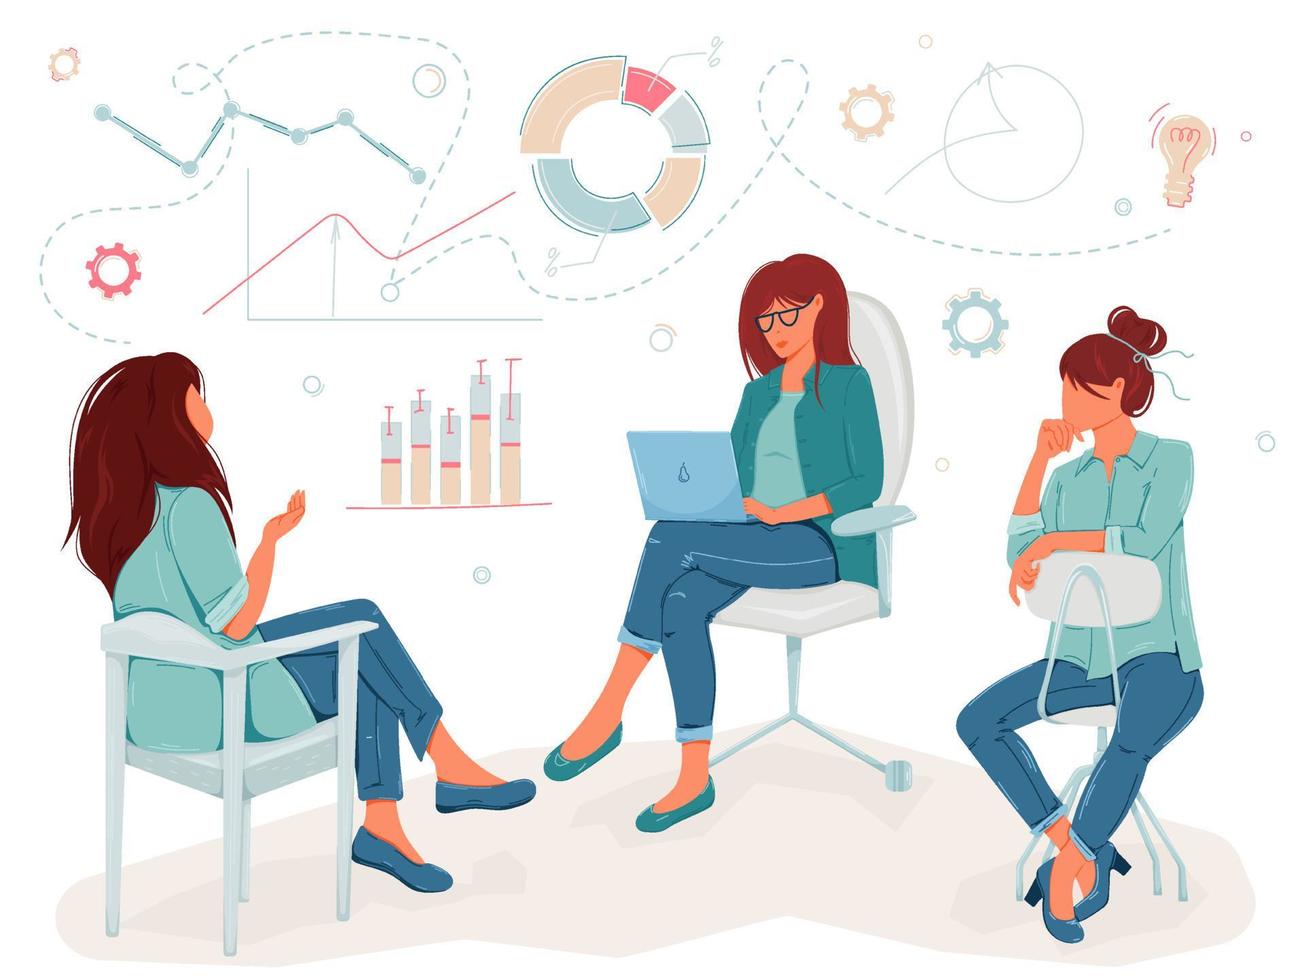 Group of women sitting and talking discussing the data. Vector illustration concept of corporate meeting, brainstorm, team discussion, conversation, business communication